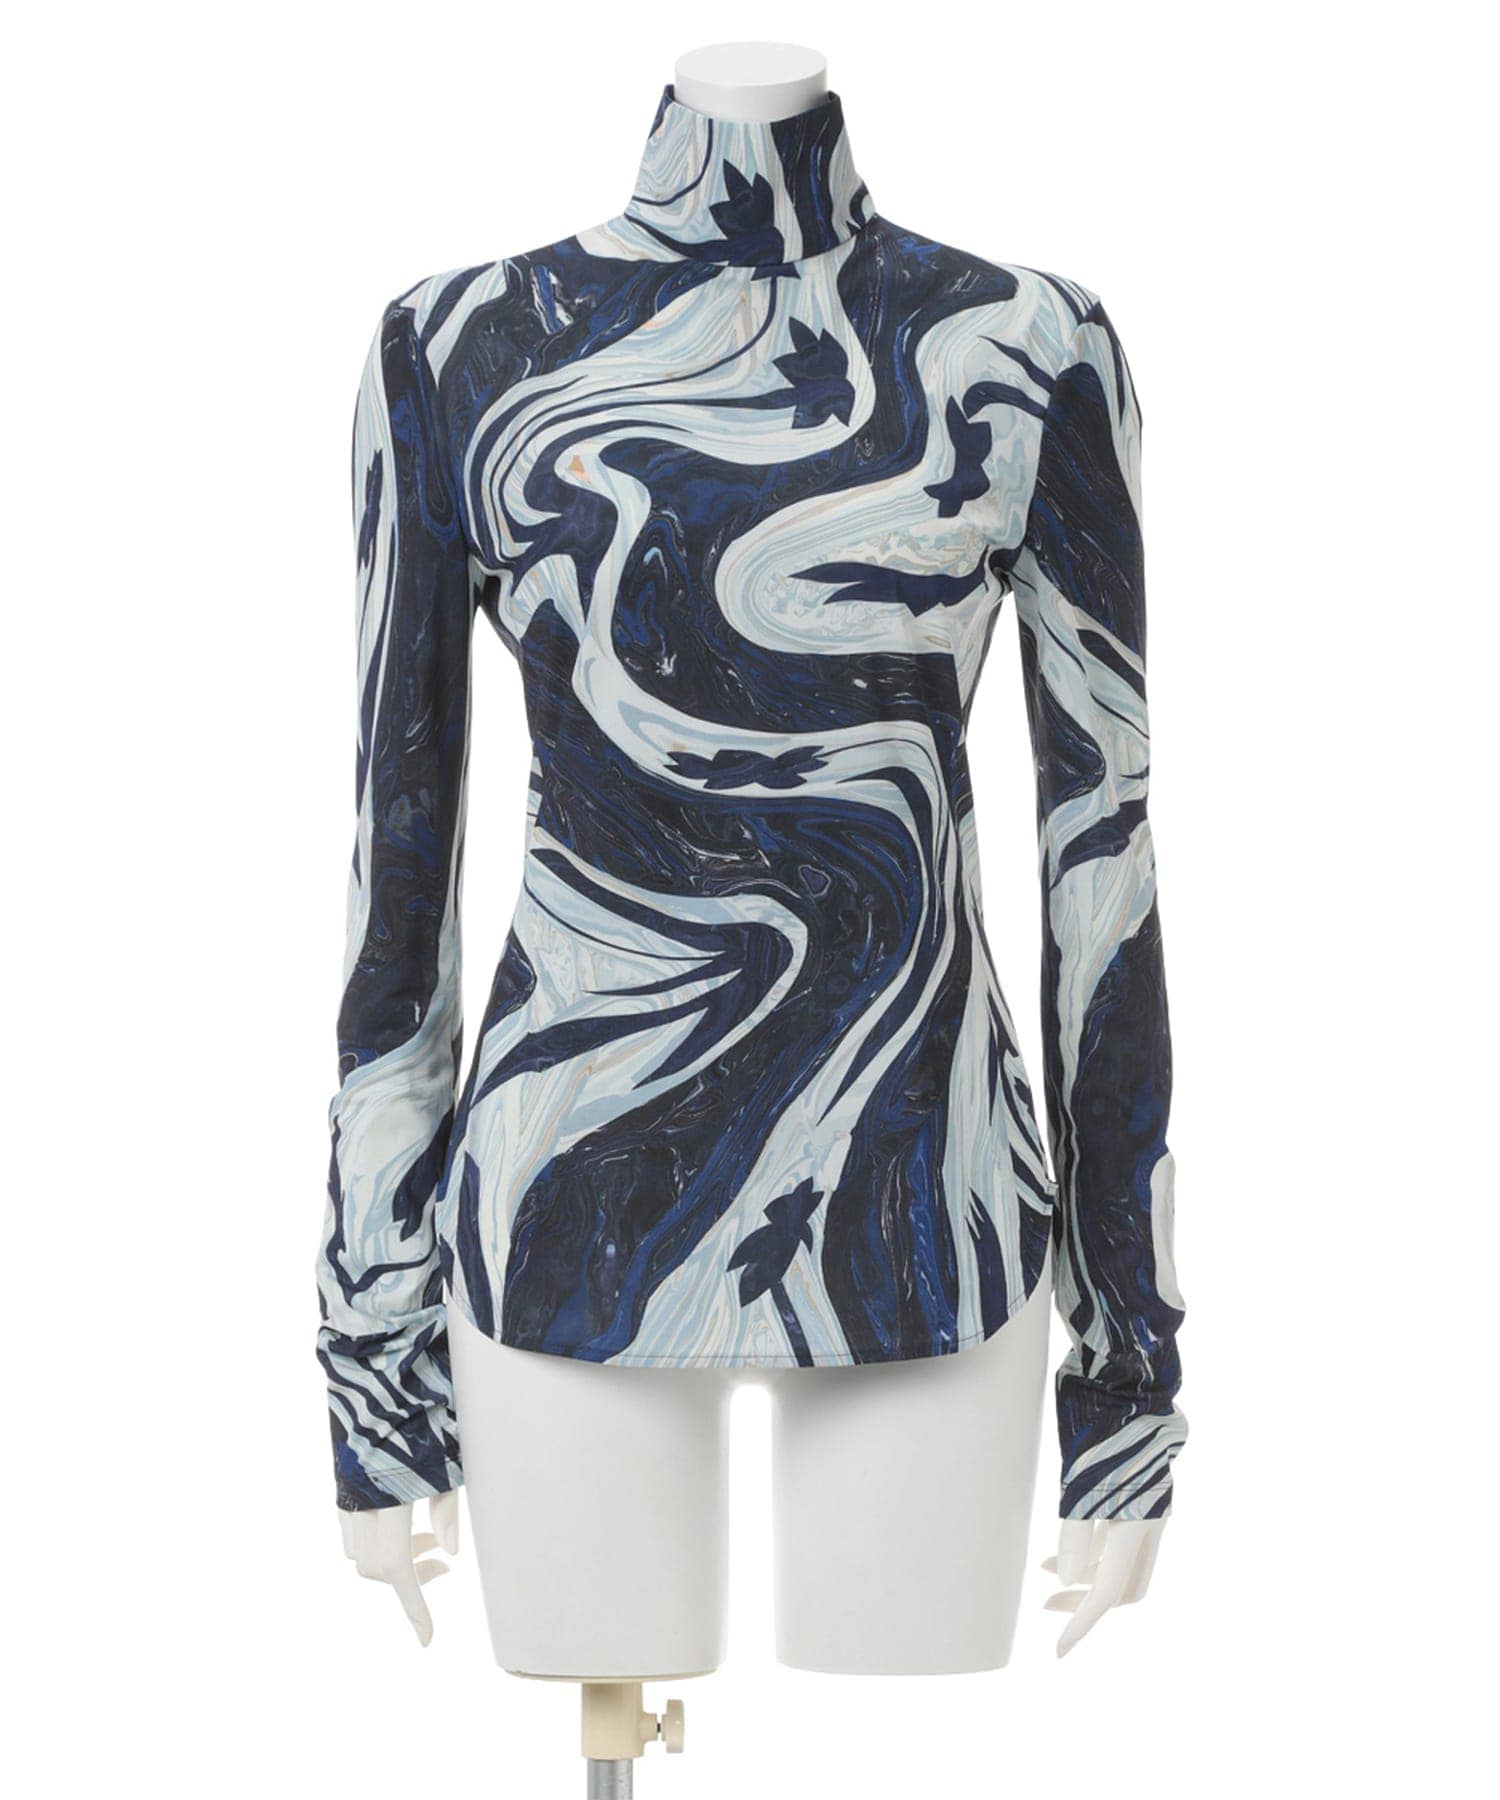 Marble Print Jersey High Neck Top